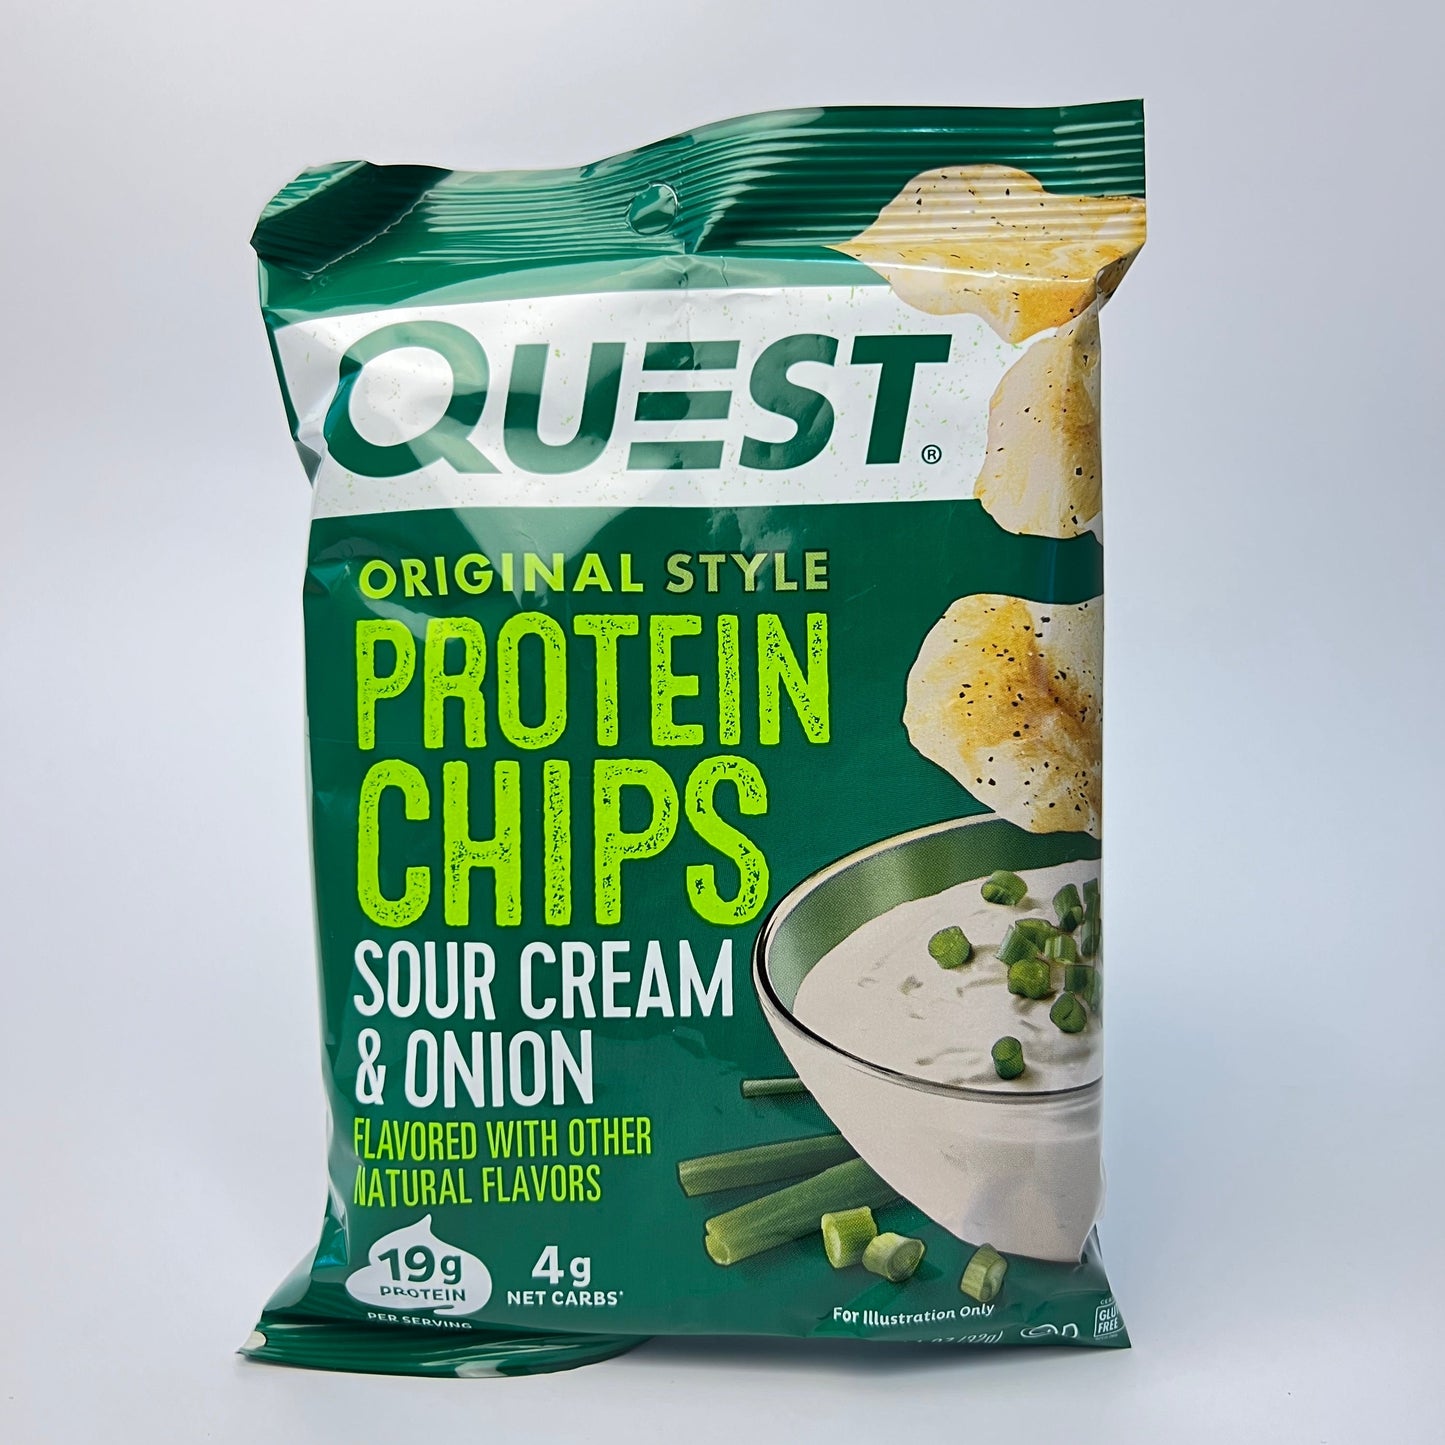 Quest Original Style Protein Chips